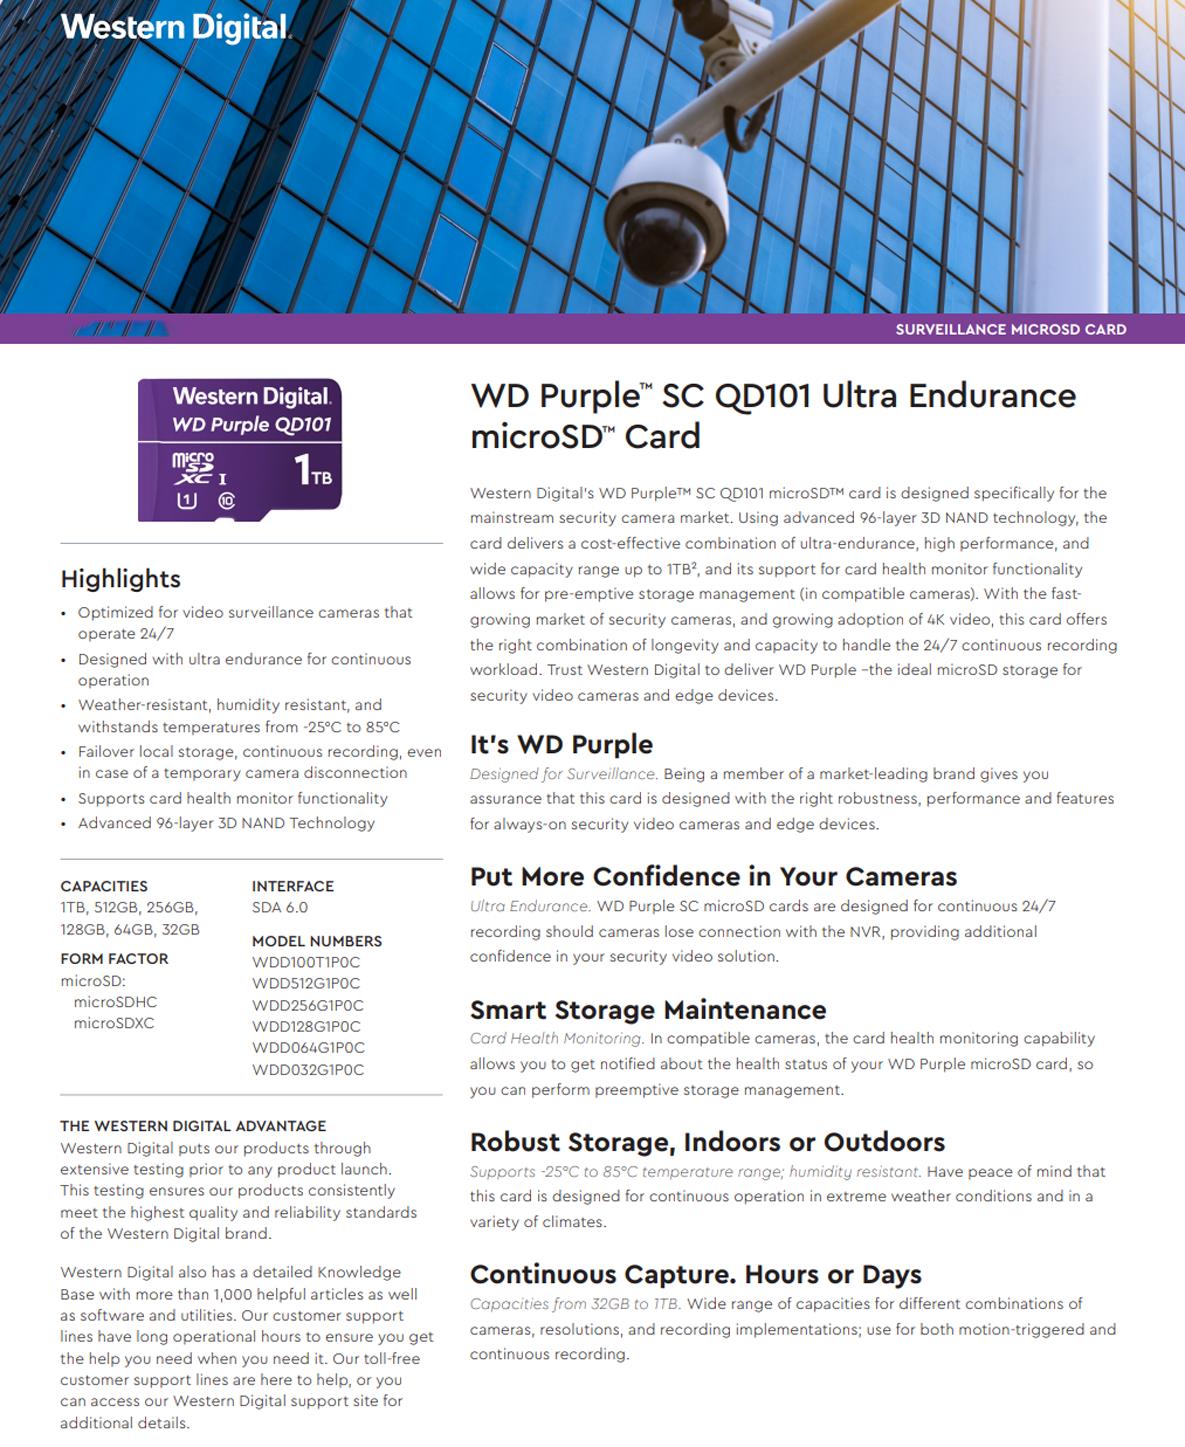 A large marketing image providing additional information about the product WD Purple Surveillance microSD Card - 1TB - Additional alt info not provided